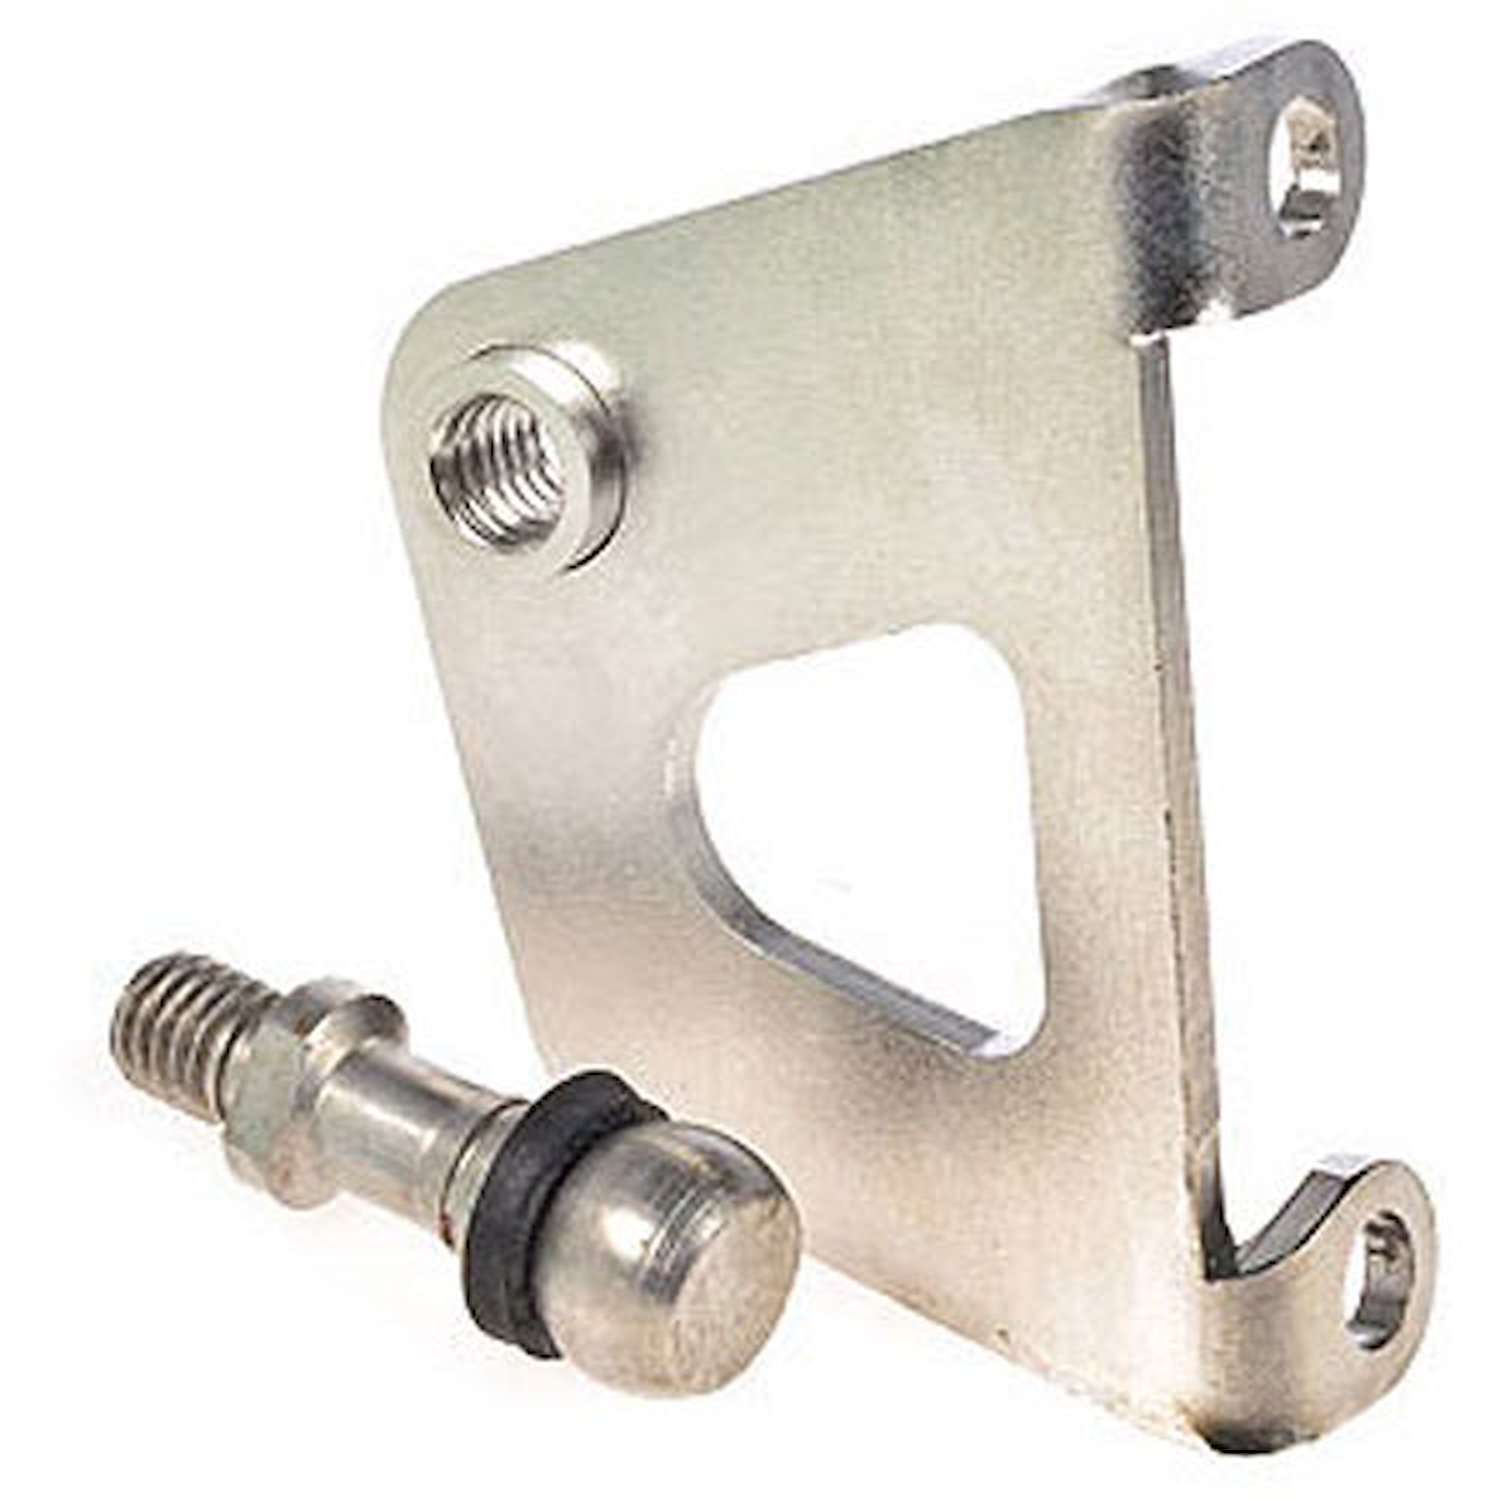 GM Clutch Pivot Ball Bracket for Cars and Trucks [Short Style]